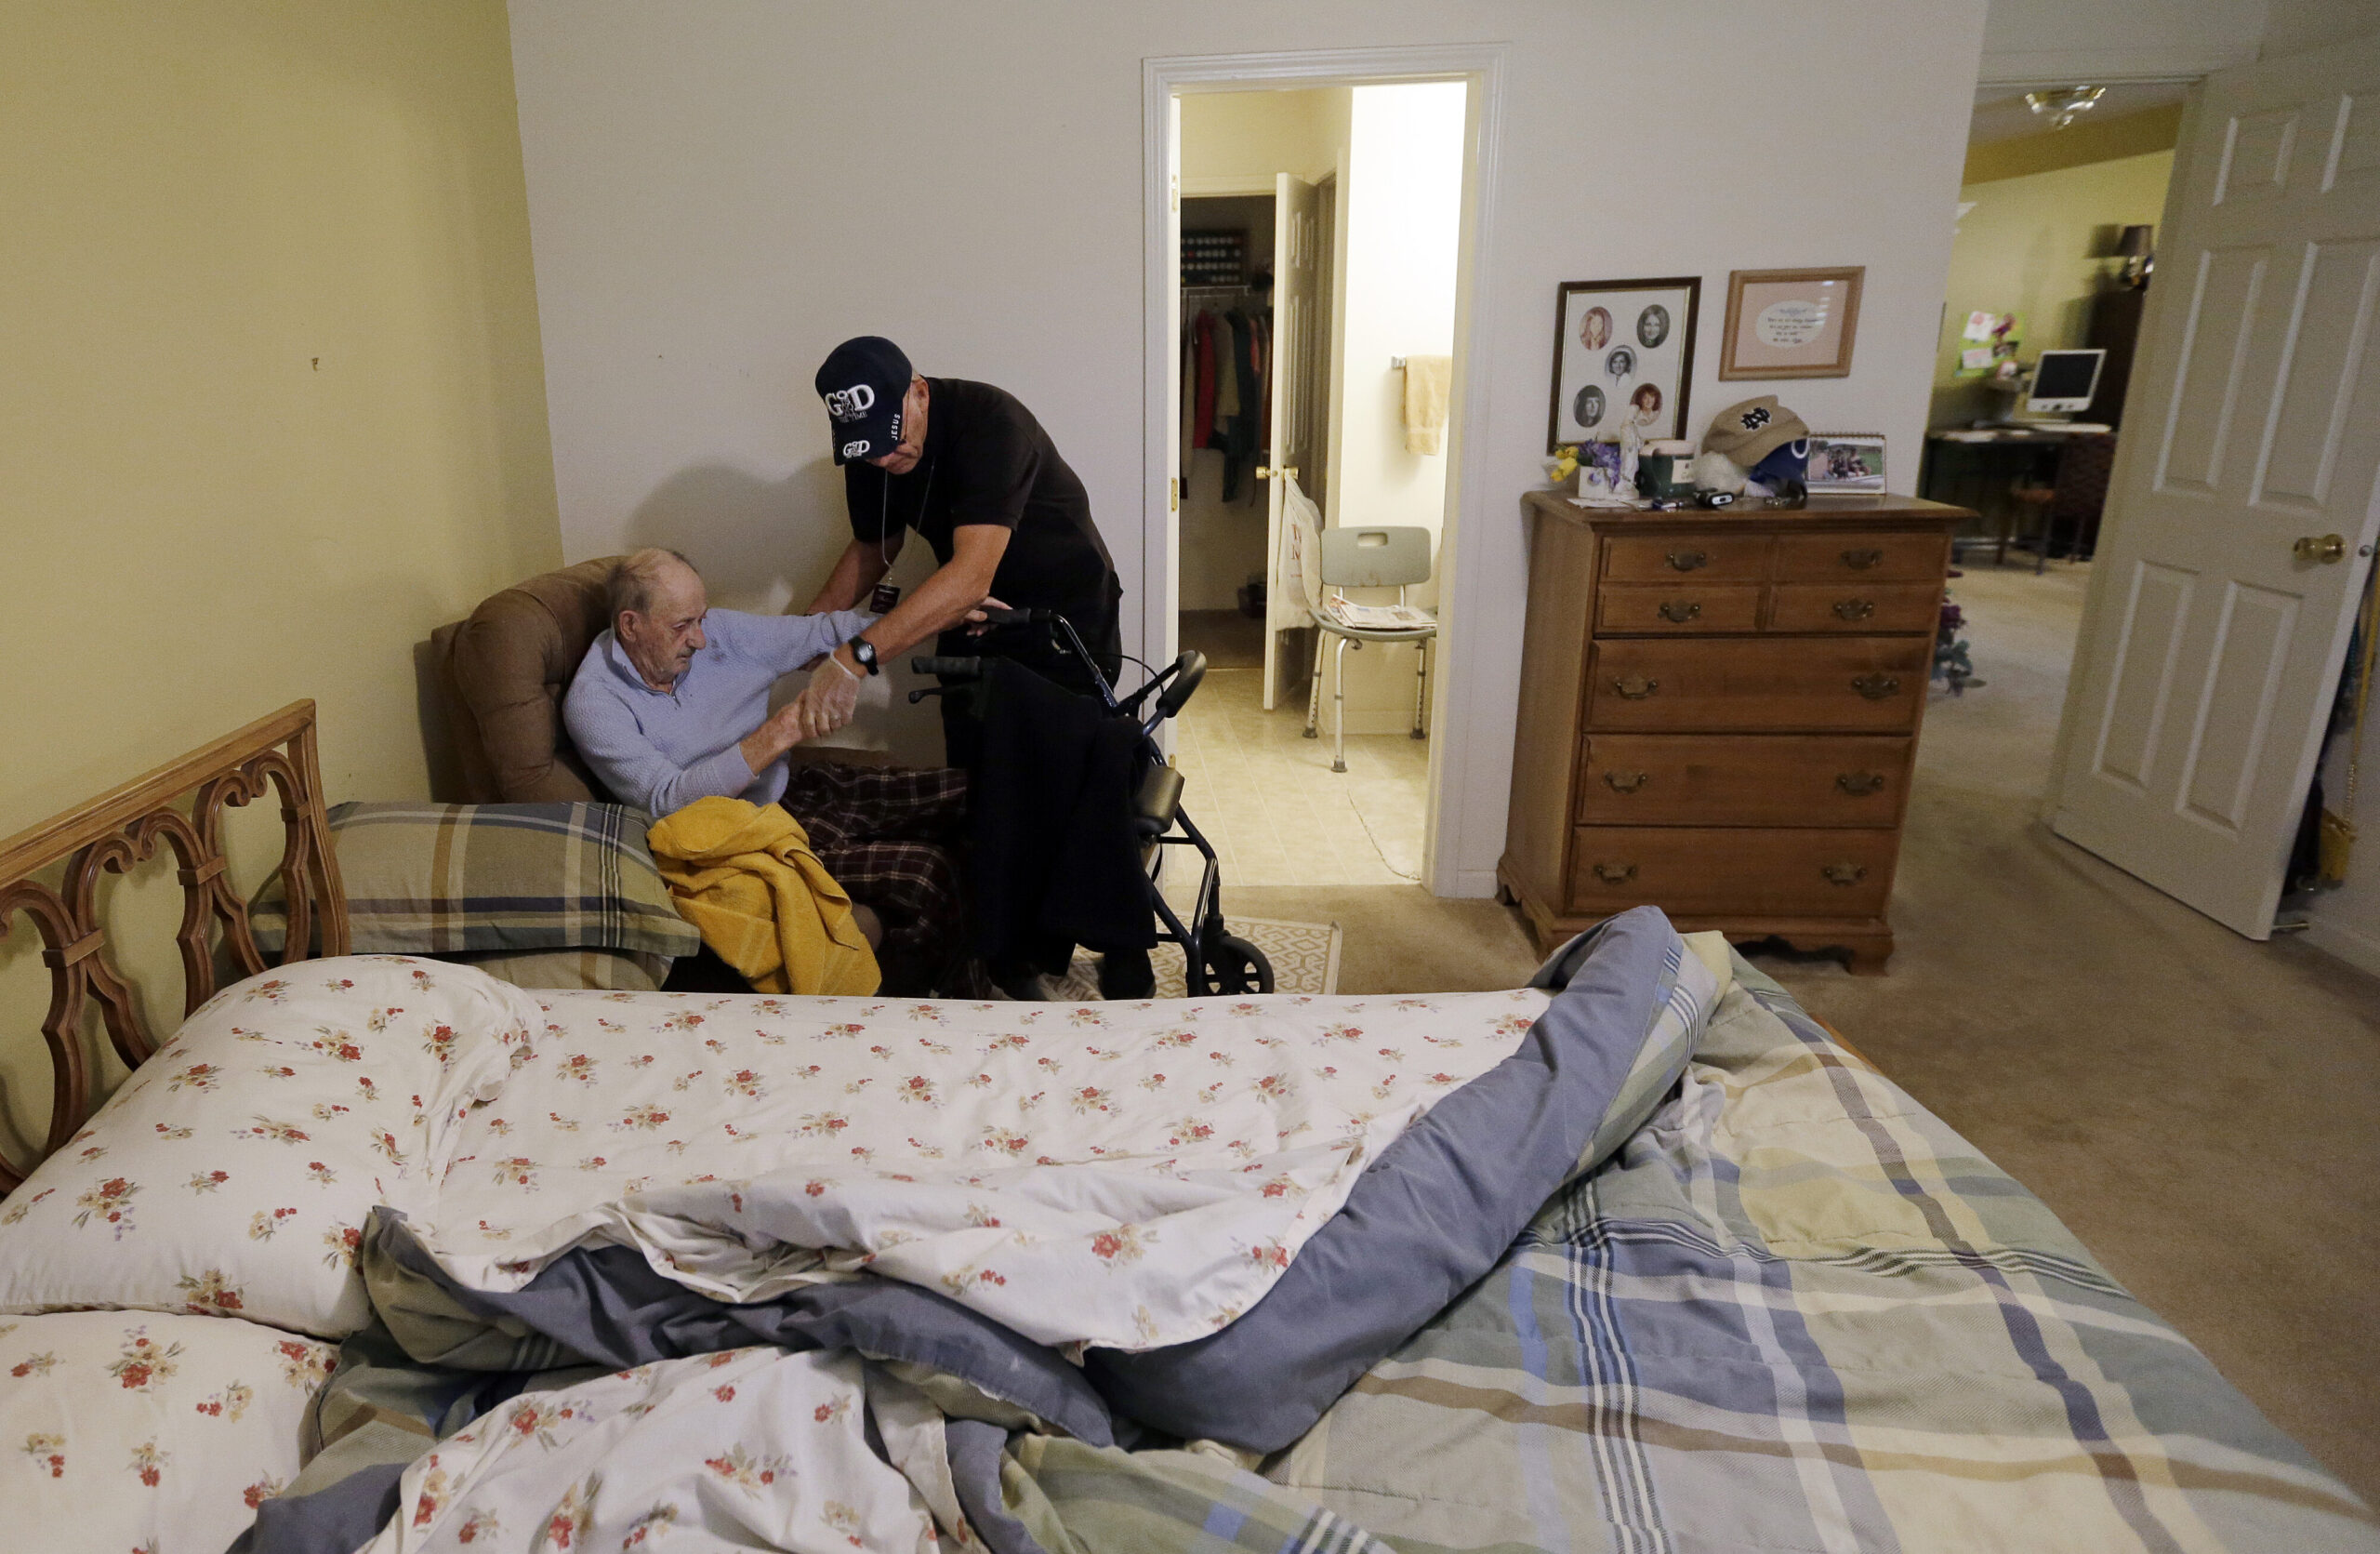 Free app hopes to combat loneliness in Wisconsin’s caregivers